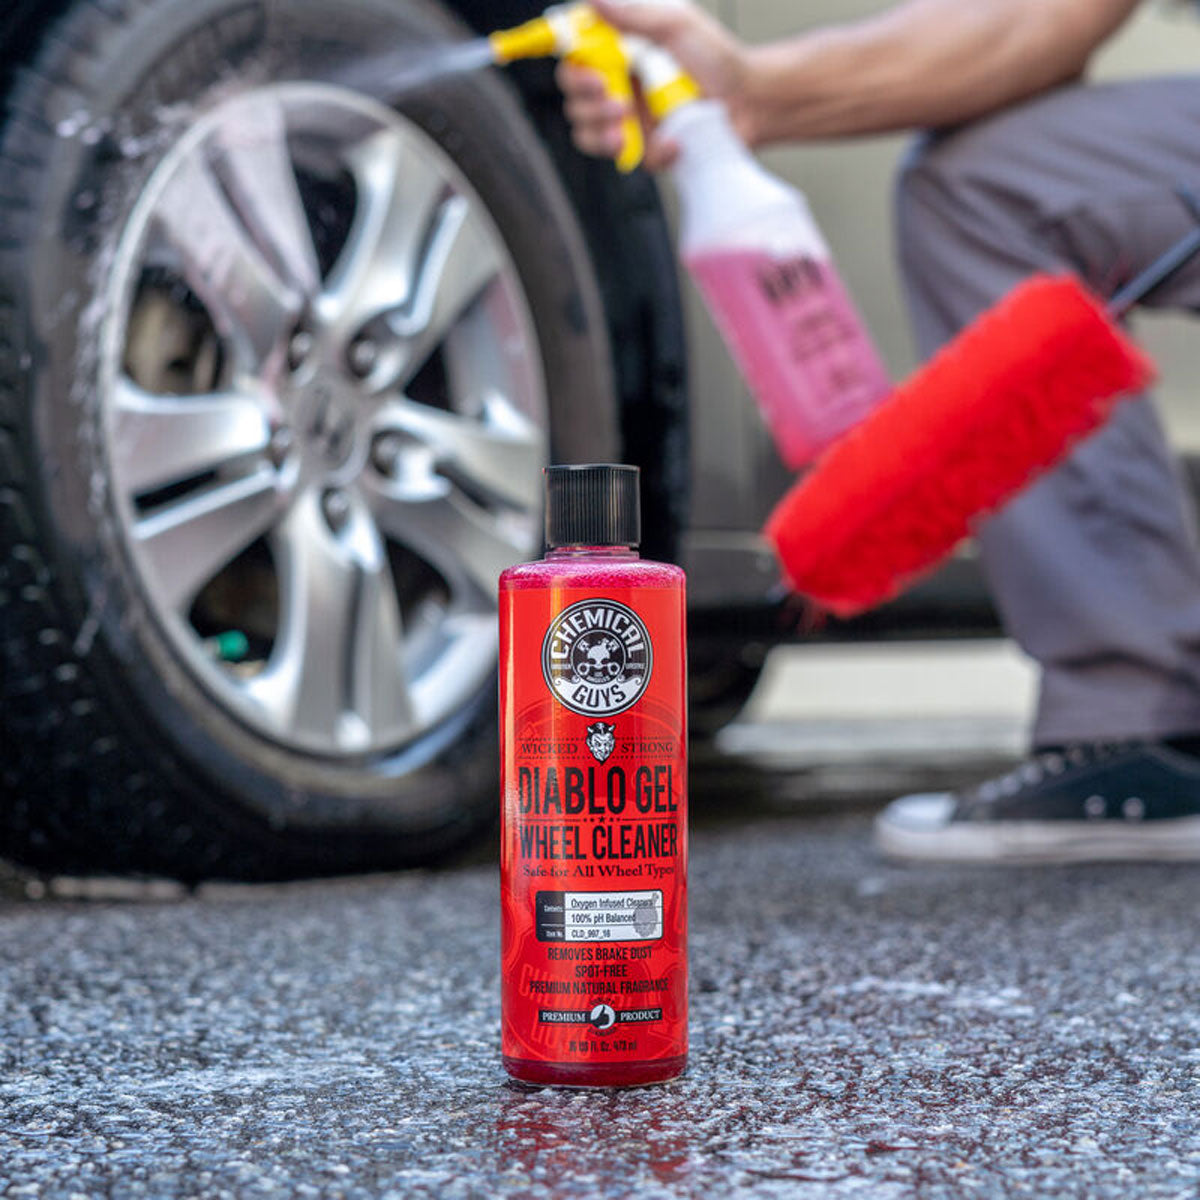 Chemical Guys Diablo Gel Wheel & Rim Cleaner Concentrated